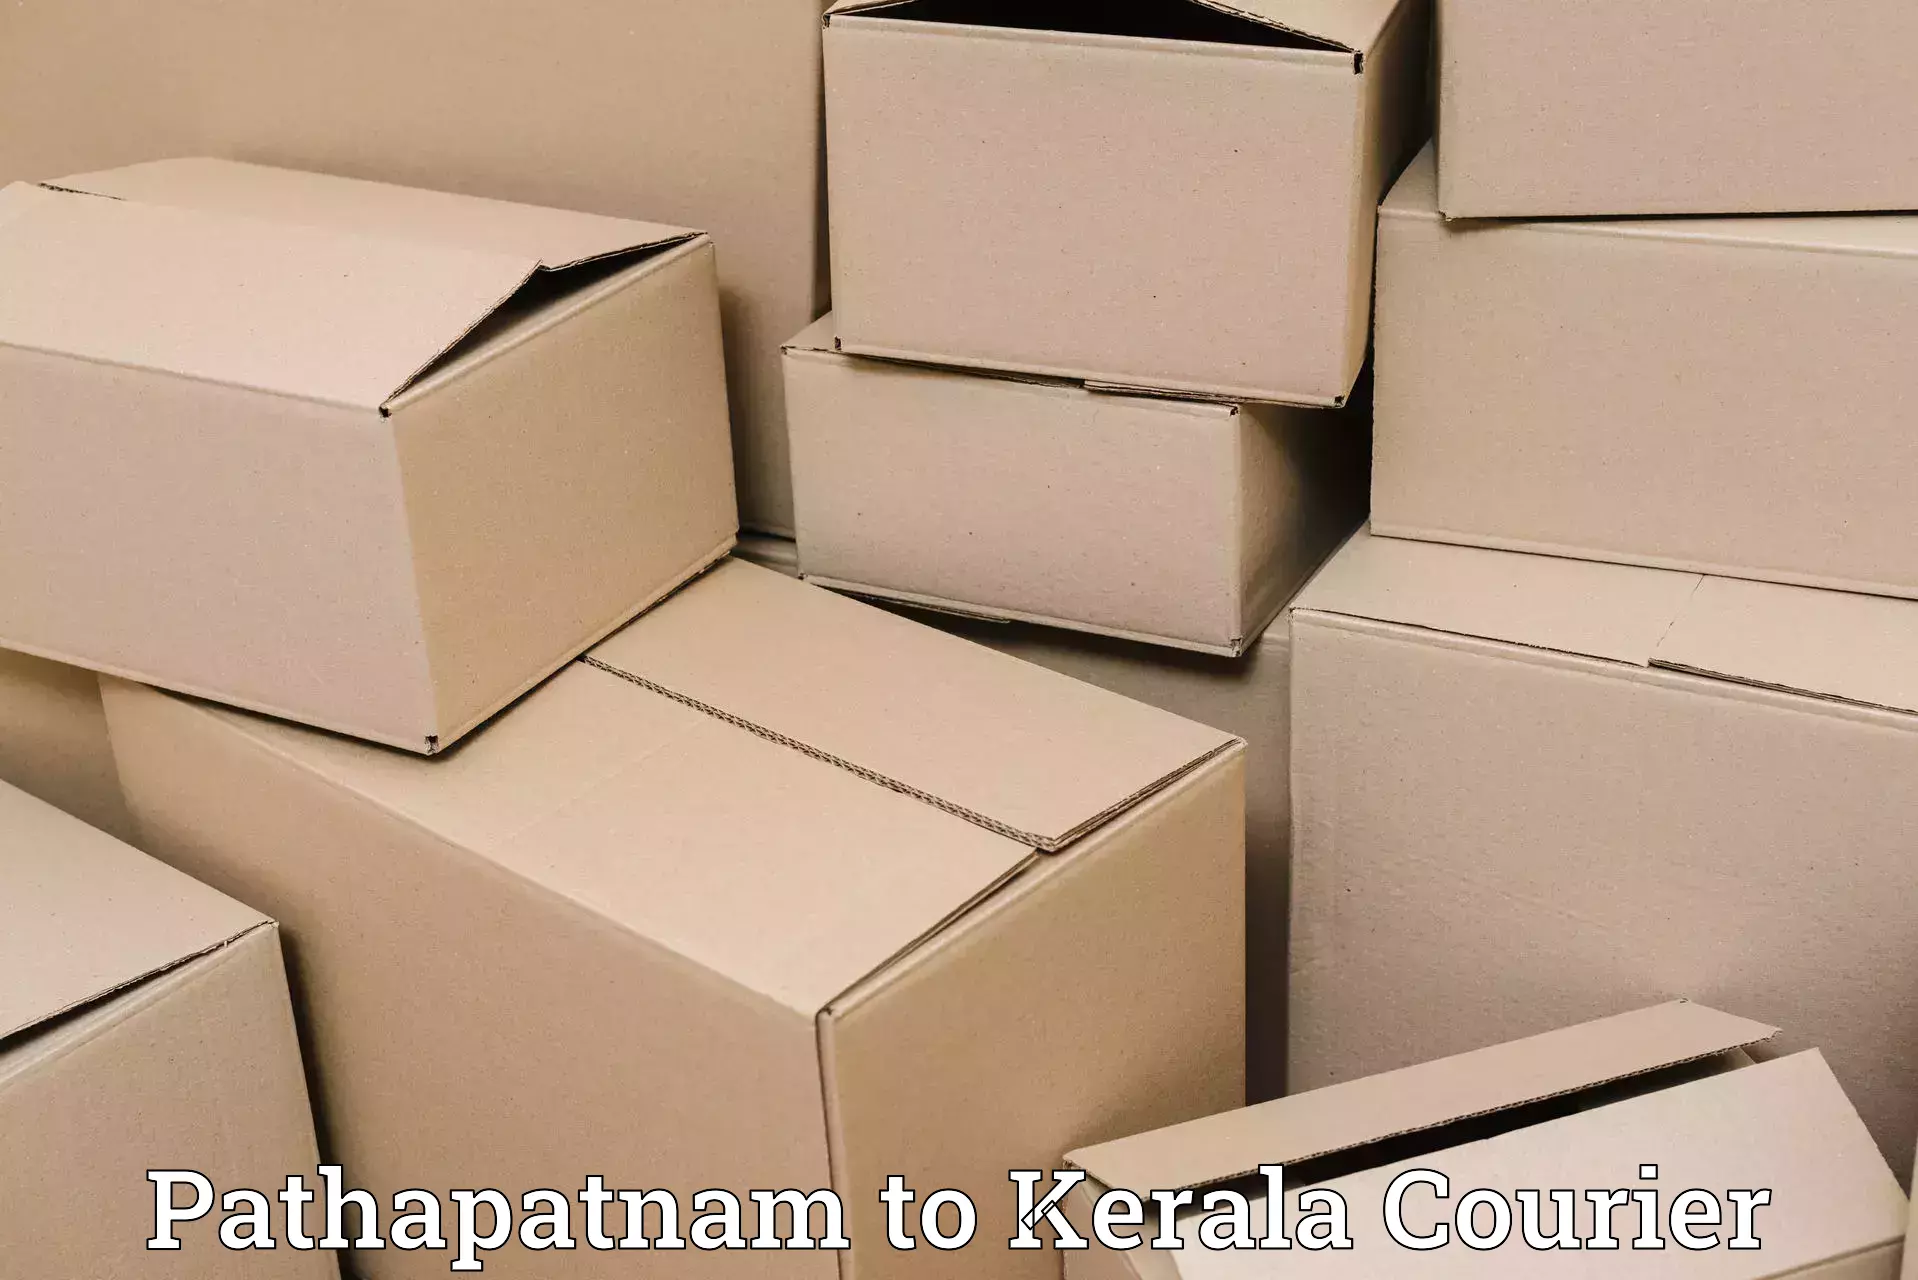 Global shipping solutions Pathapatnam to Ottapalam